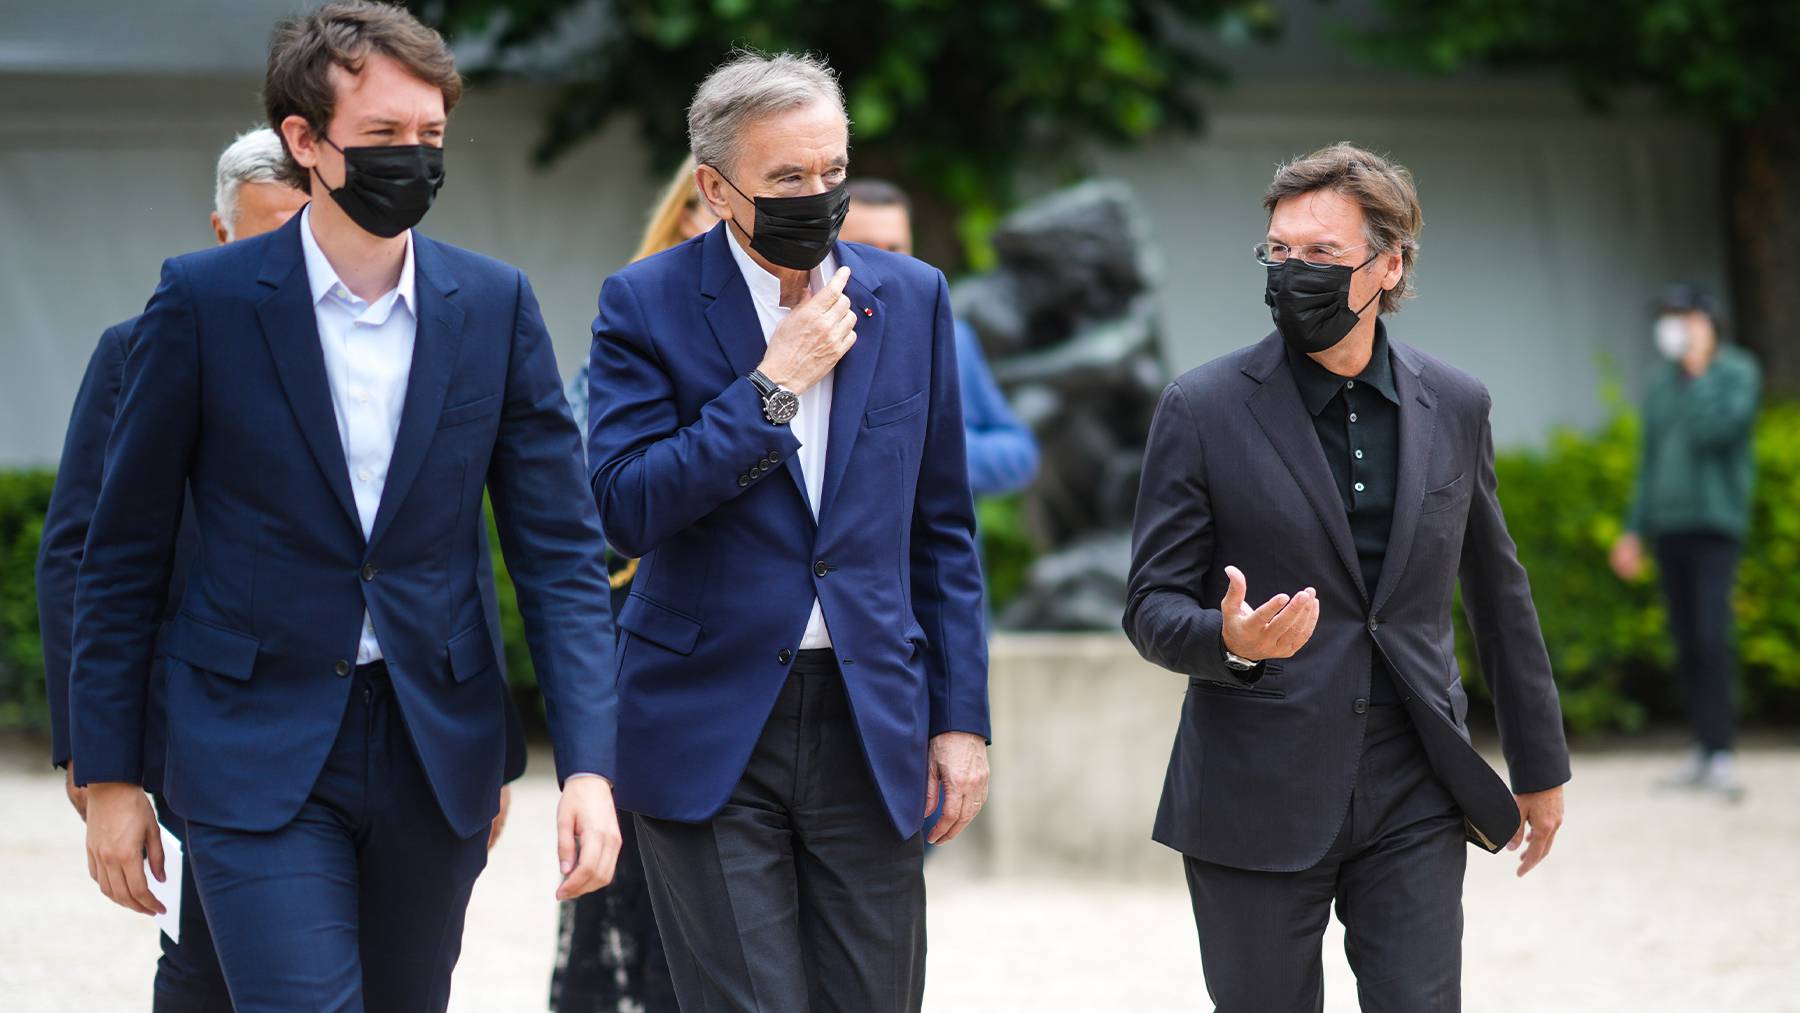 LVMH chairman Bernard Arnault arrives at Dior’s haute couture show with his son Frédéric and the brand’s CEO Pietro Beccari.